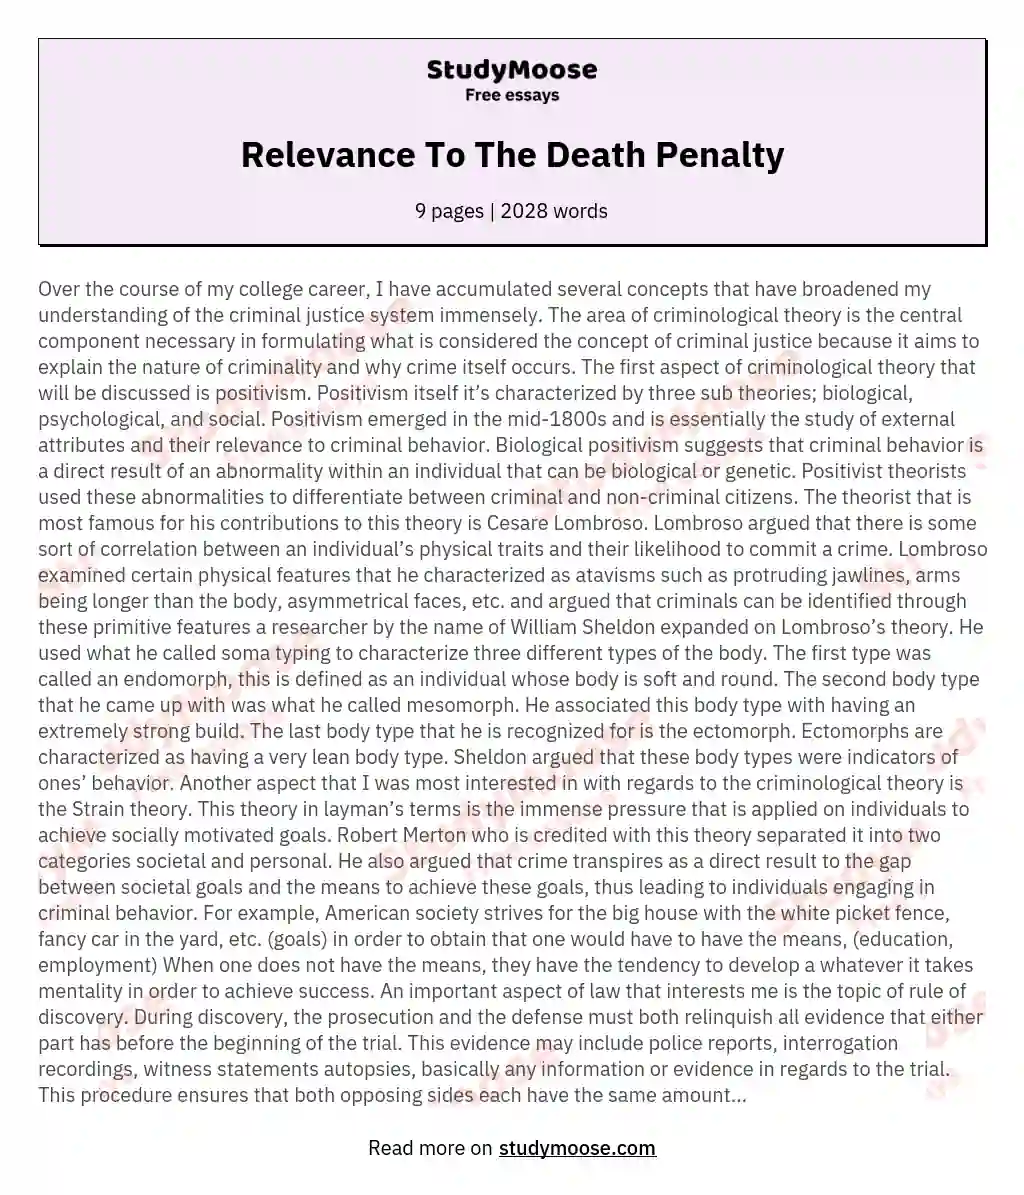 Relevance To The Death Penalty essay